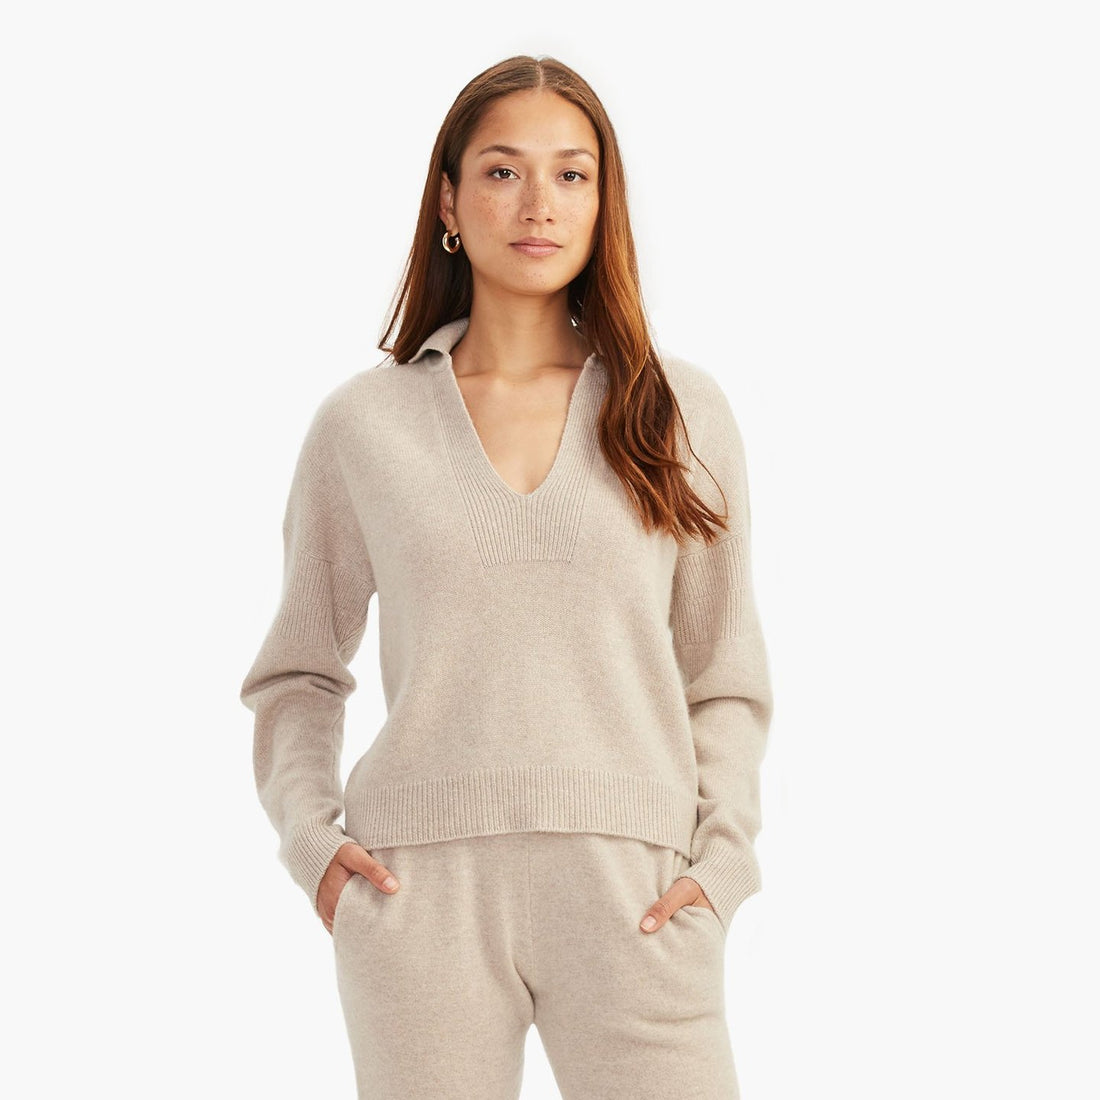 Snag the Coziest Cashmere Loungewear You’ve Ever Laid Eyes on For 30% Off at the Nadaam Sale